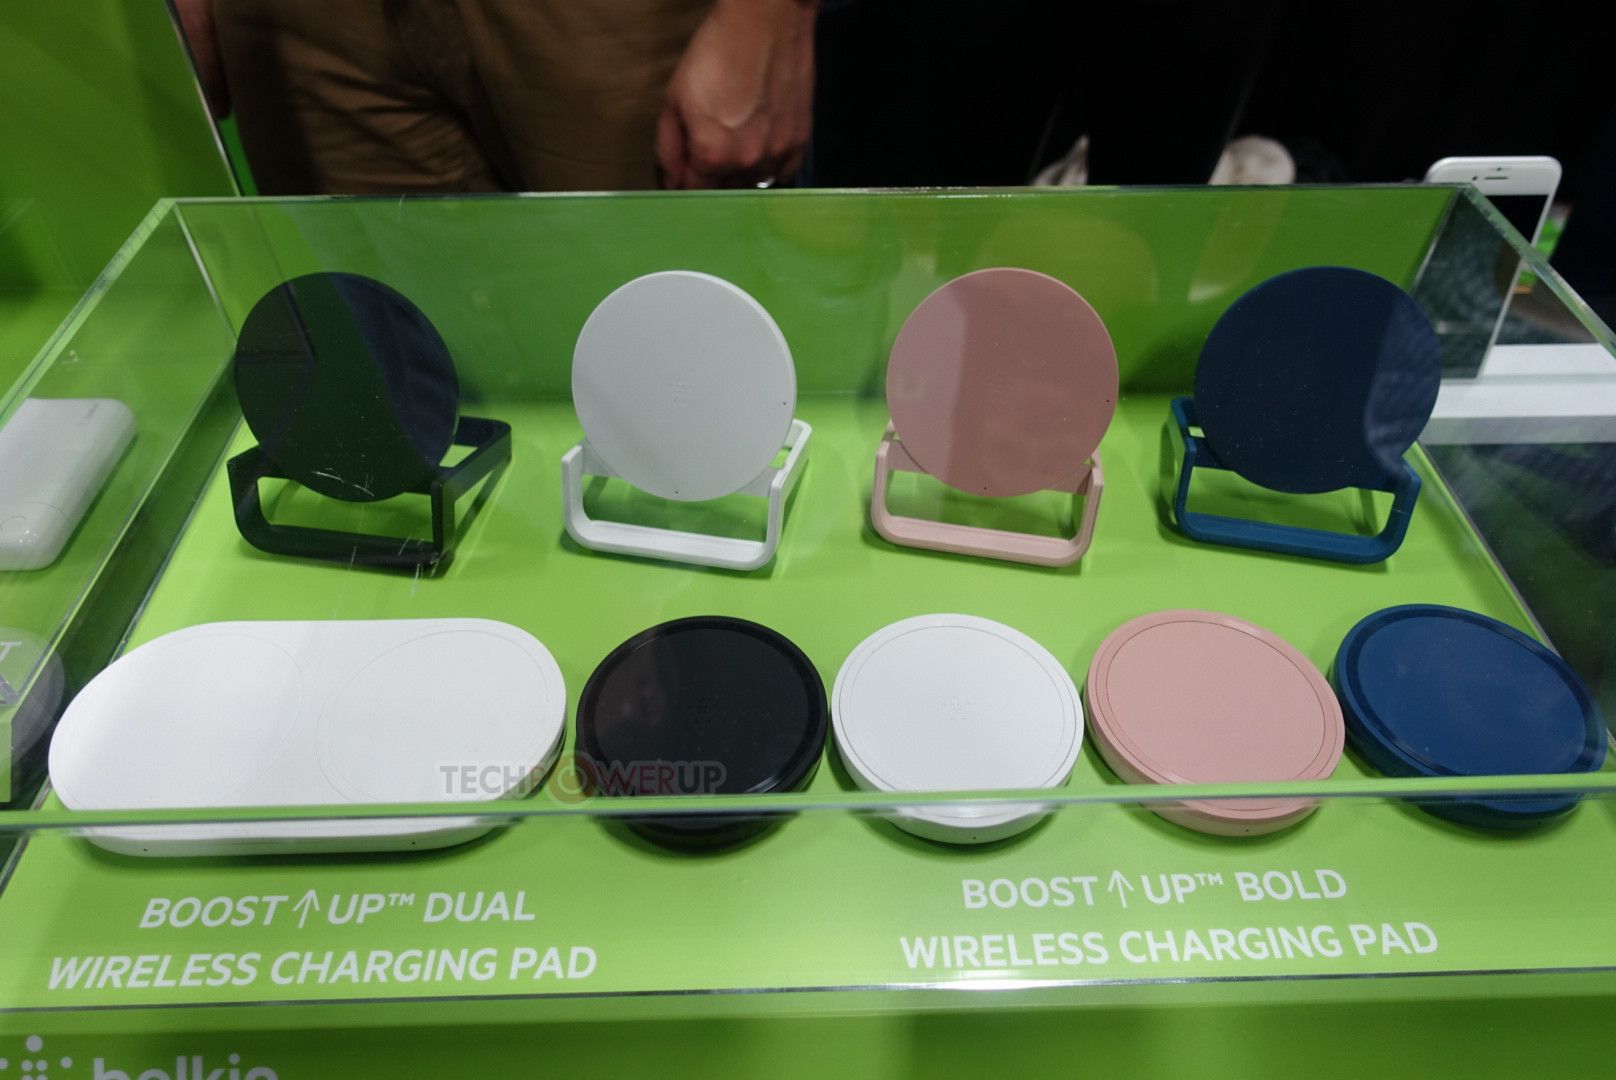 Qi brings new wireless charging patches to CES 2018